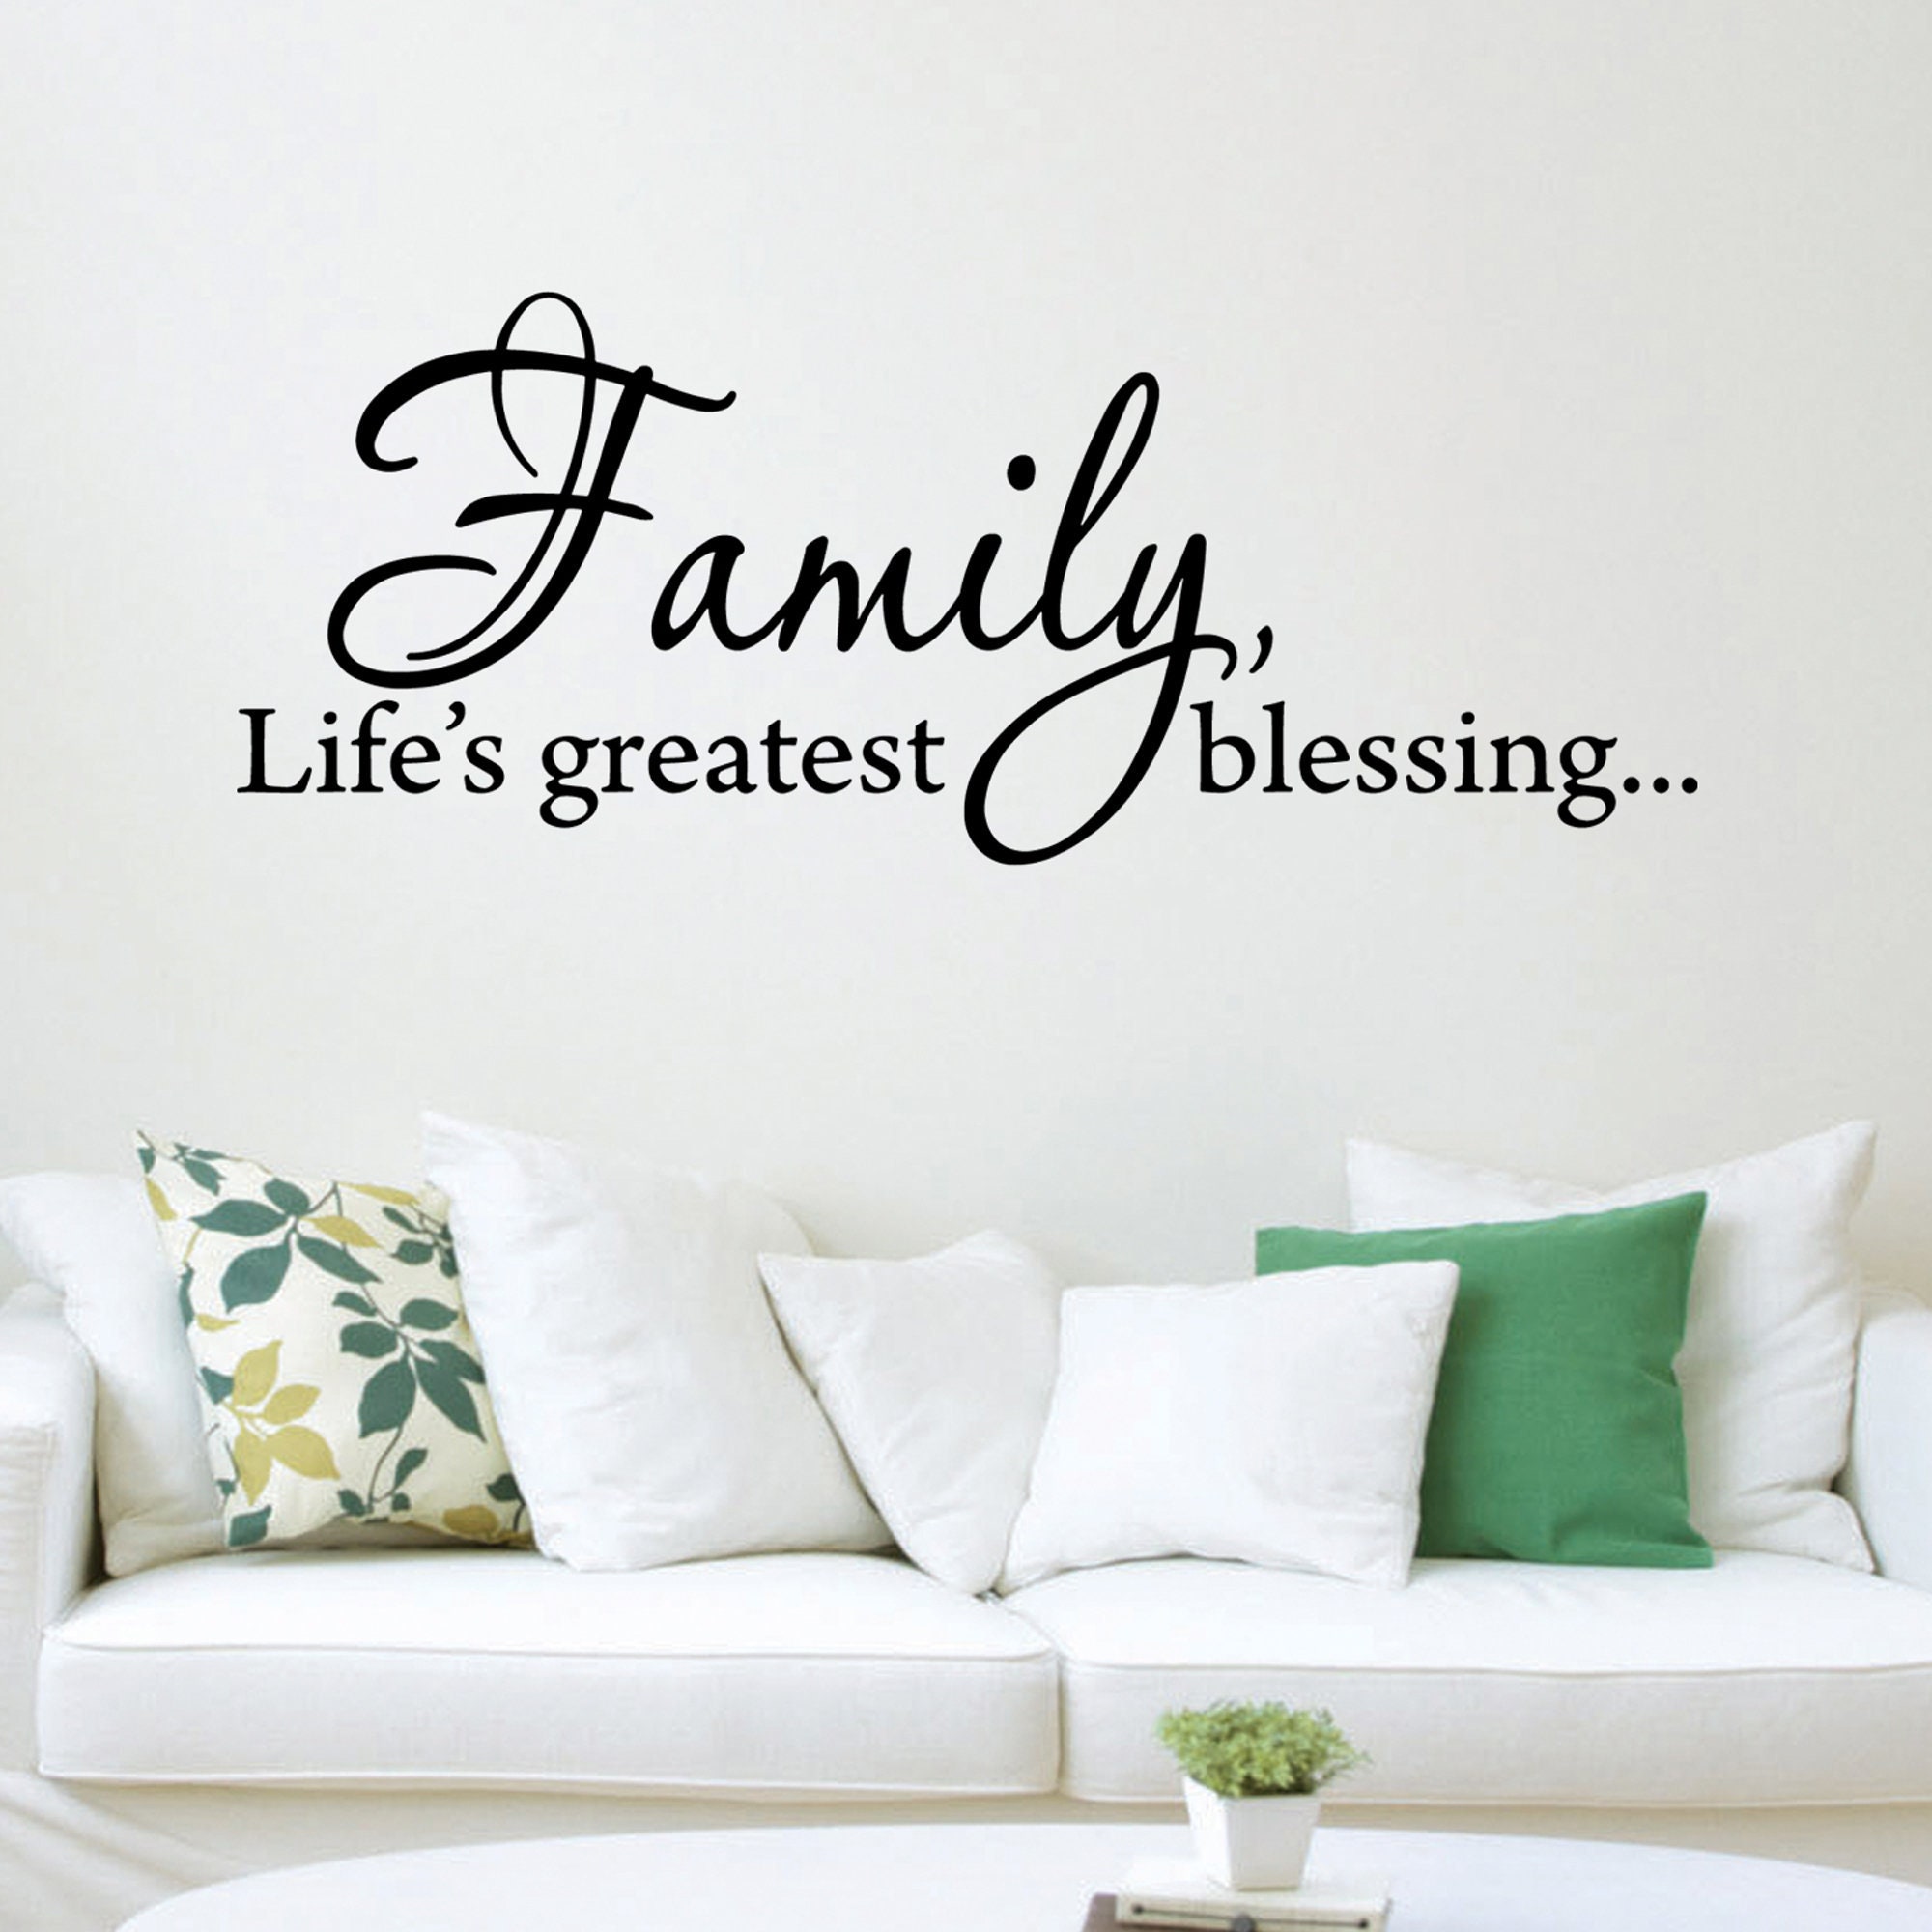 Our Greatest Blessings call us Nanny & Grandad Vinyl wall art Decal Sticker 